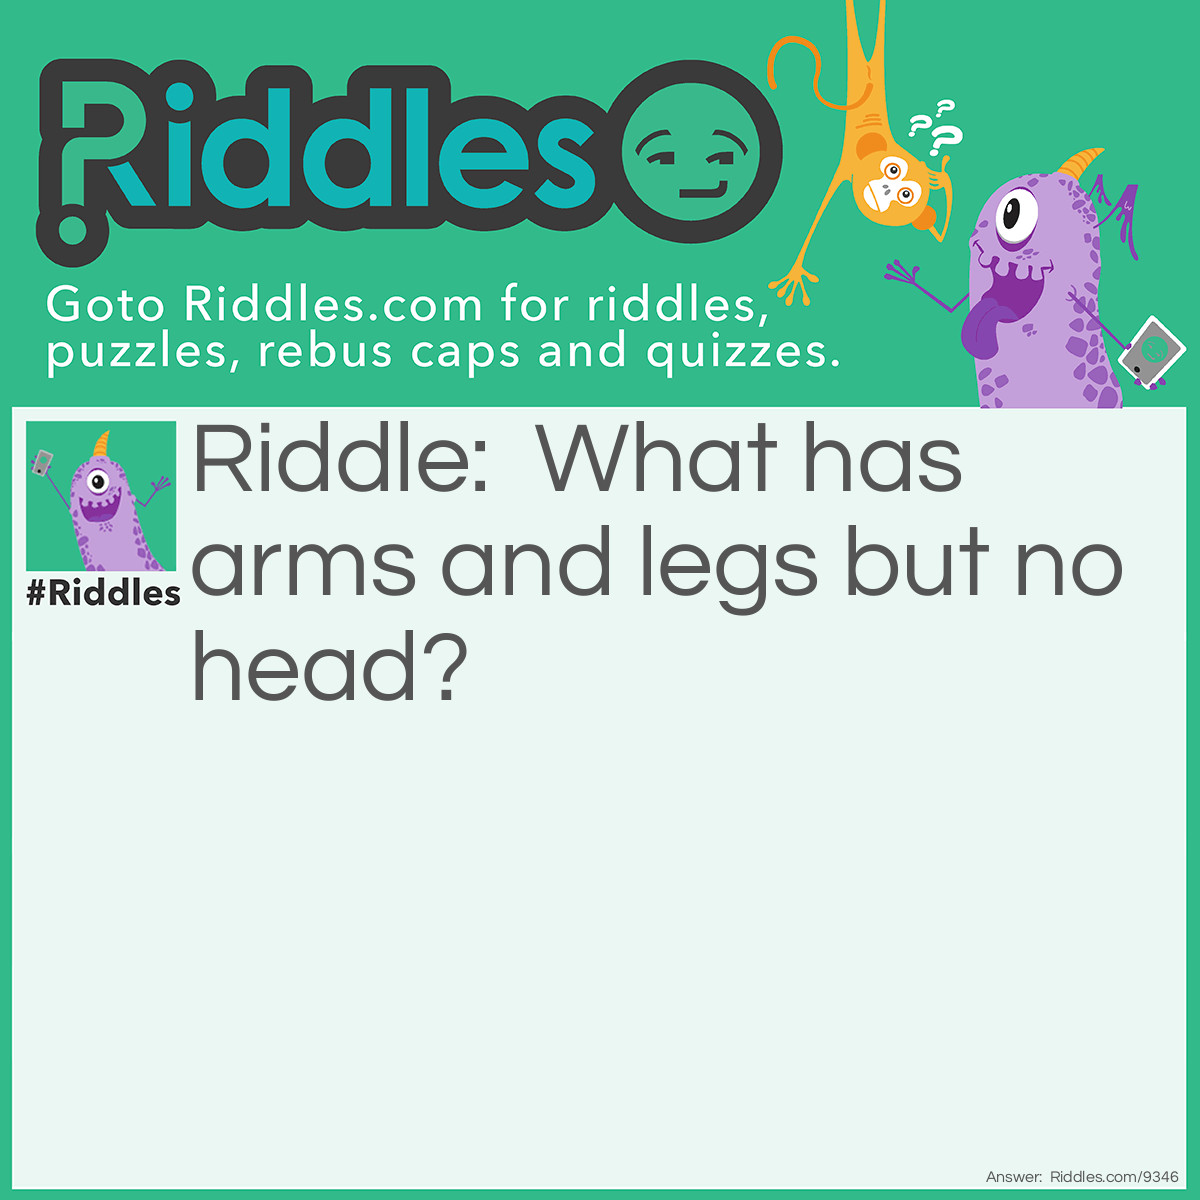 Riddle: What has arms and legs but no head? Answer: A chair!